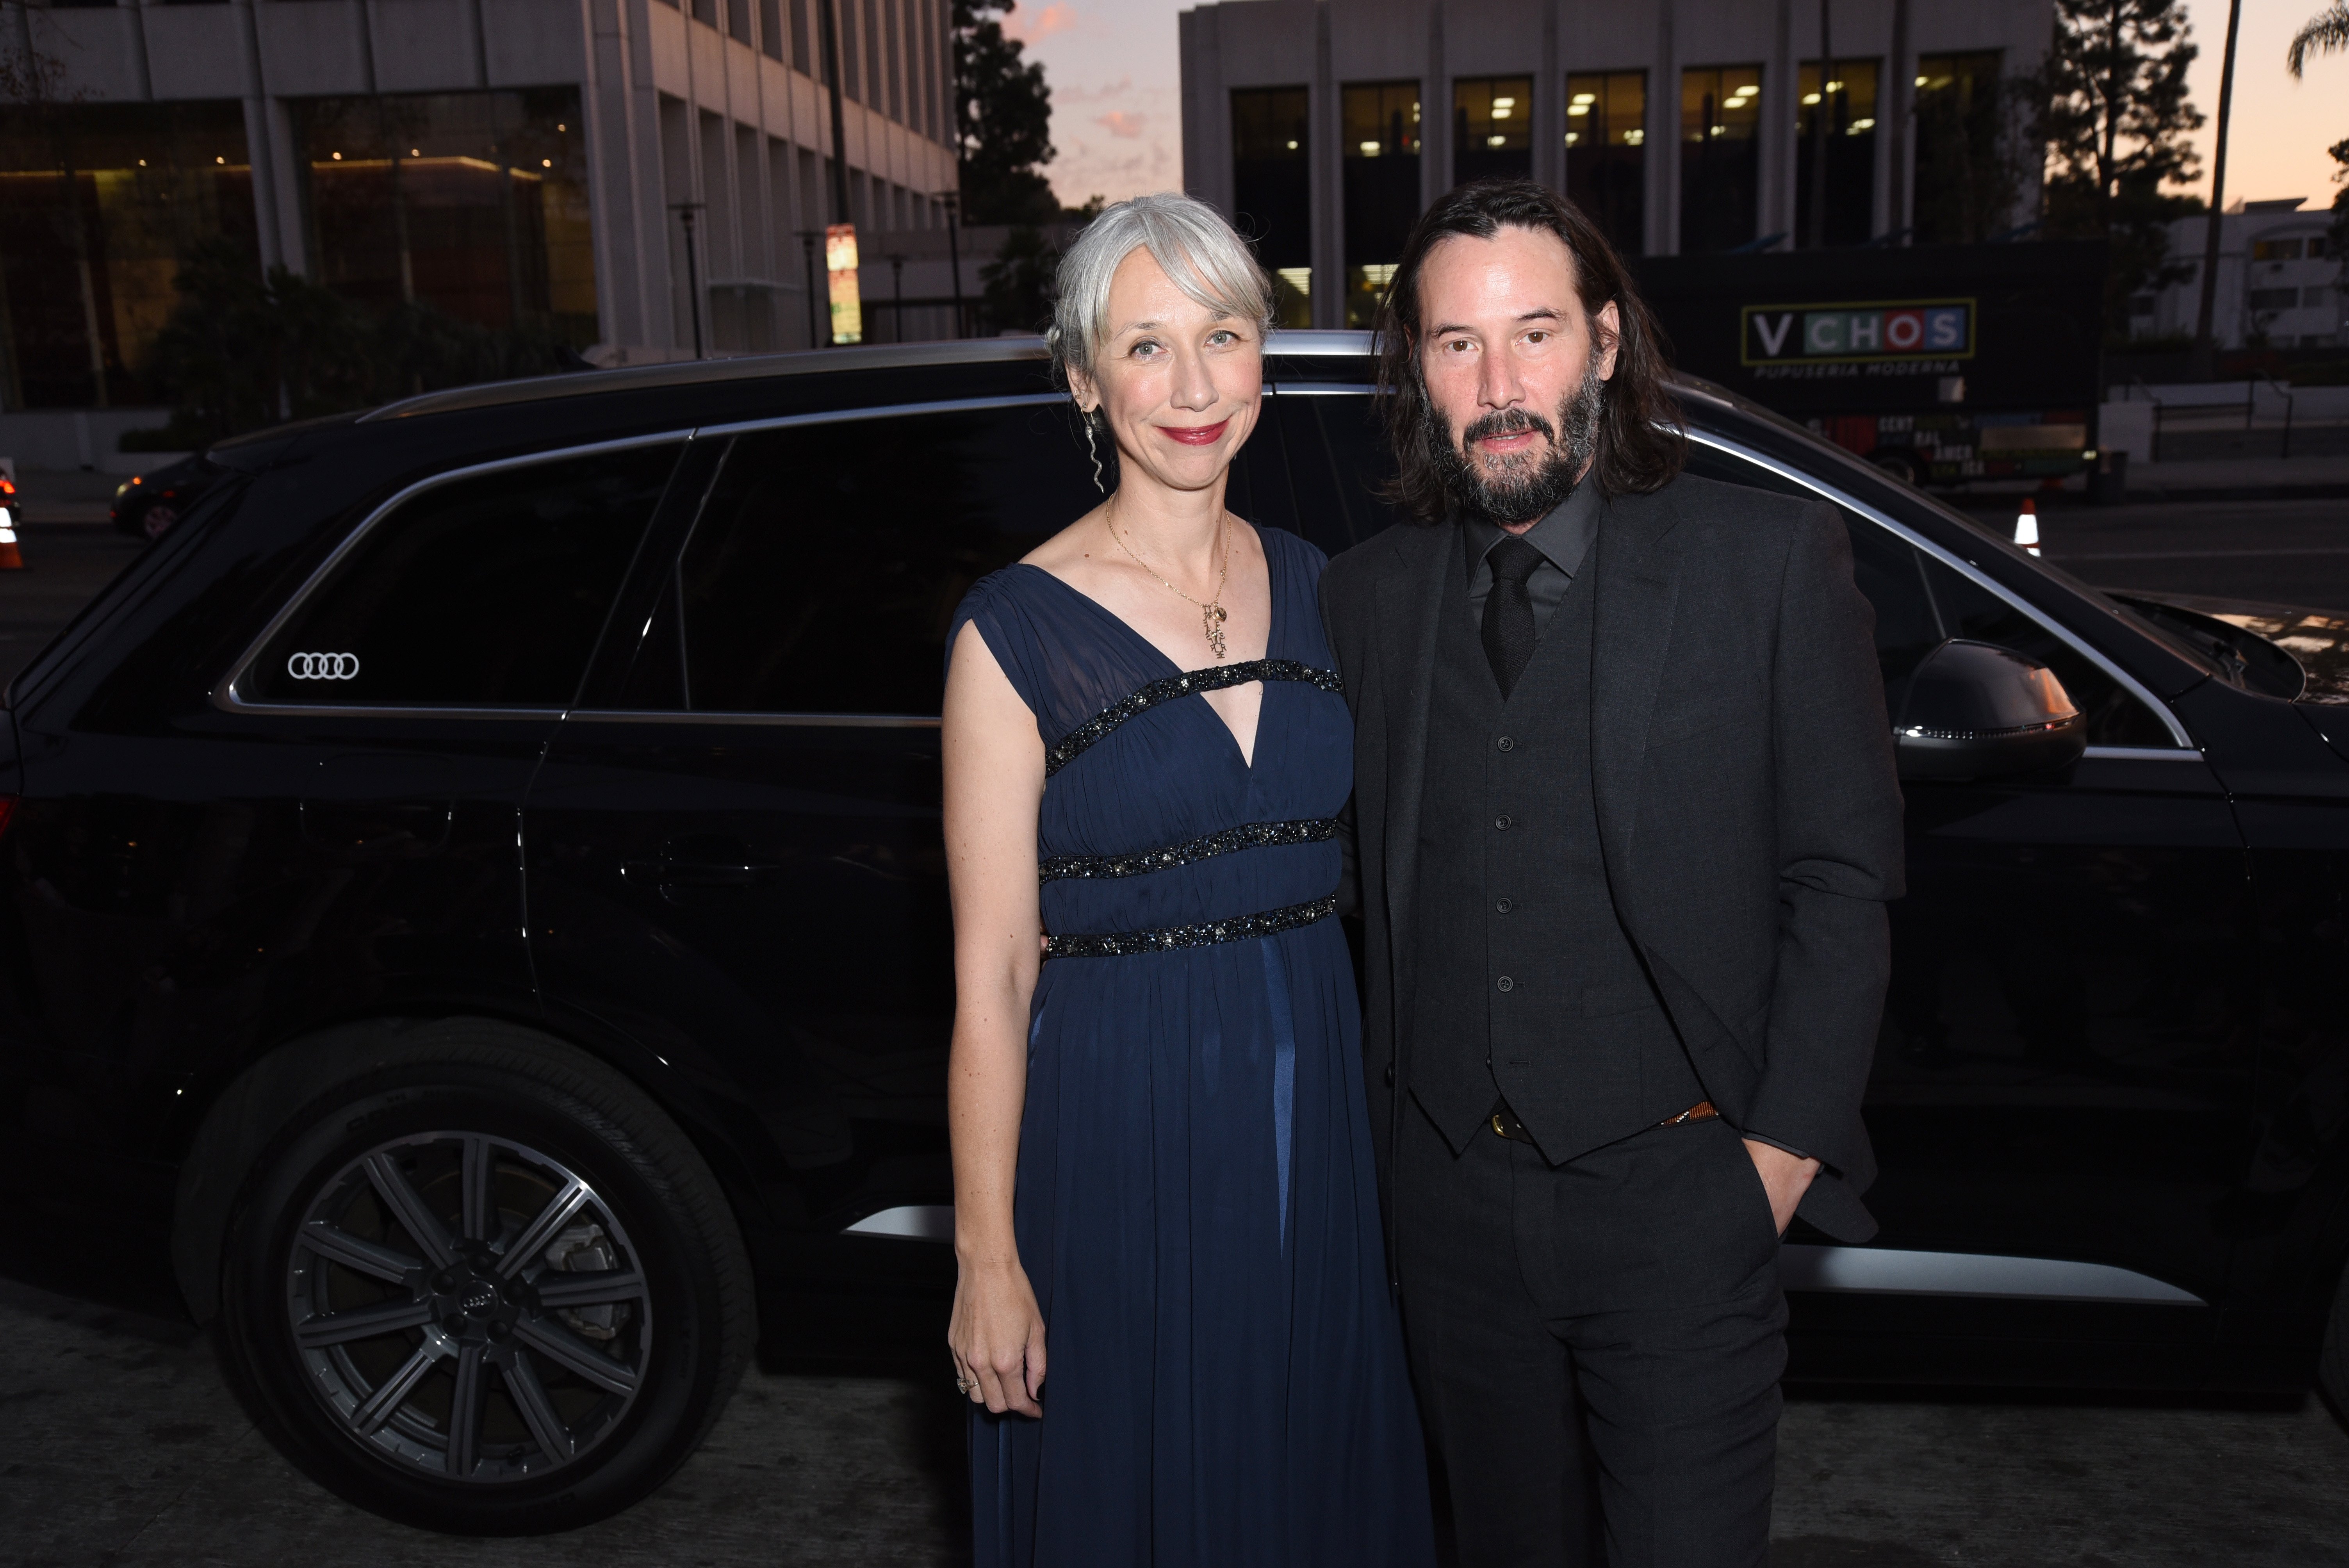 Keanu Reeves und Alexandra Grant in Los Angeles 2019. | Quelle: Getty Images